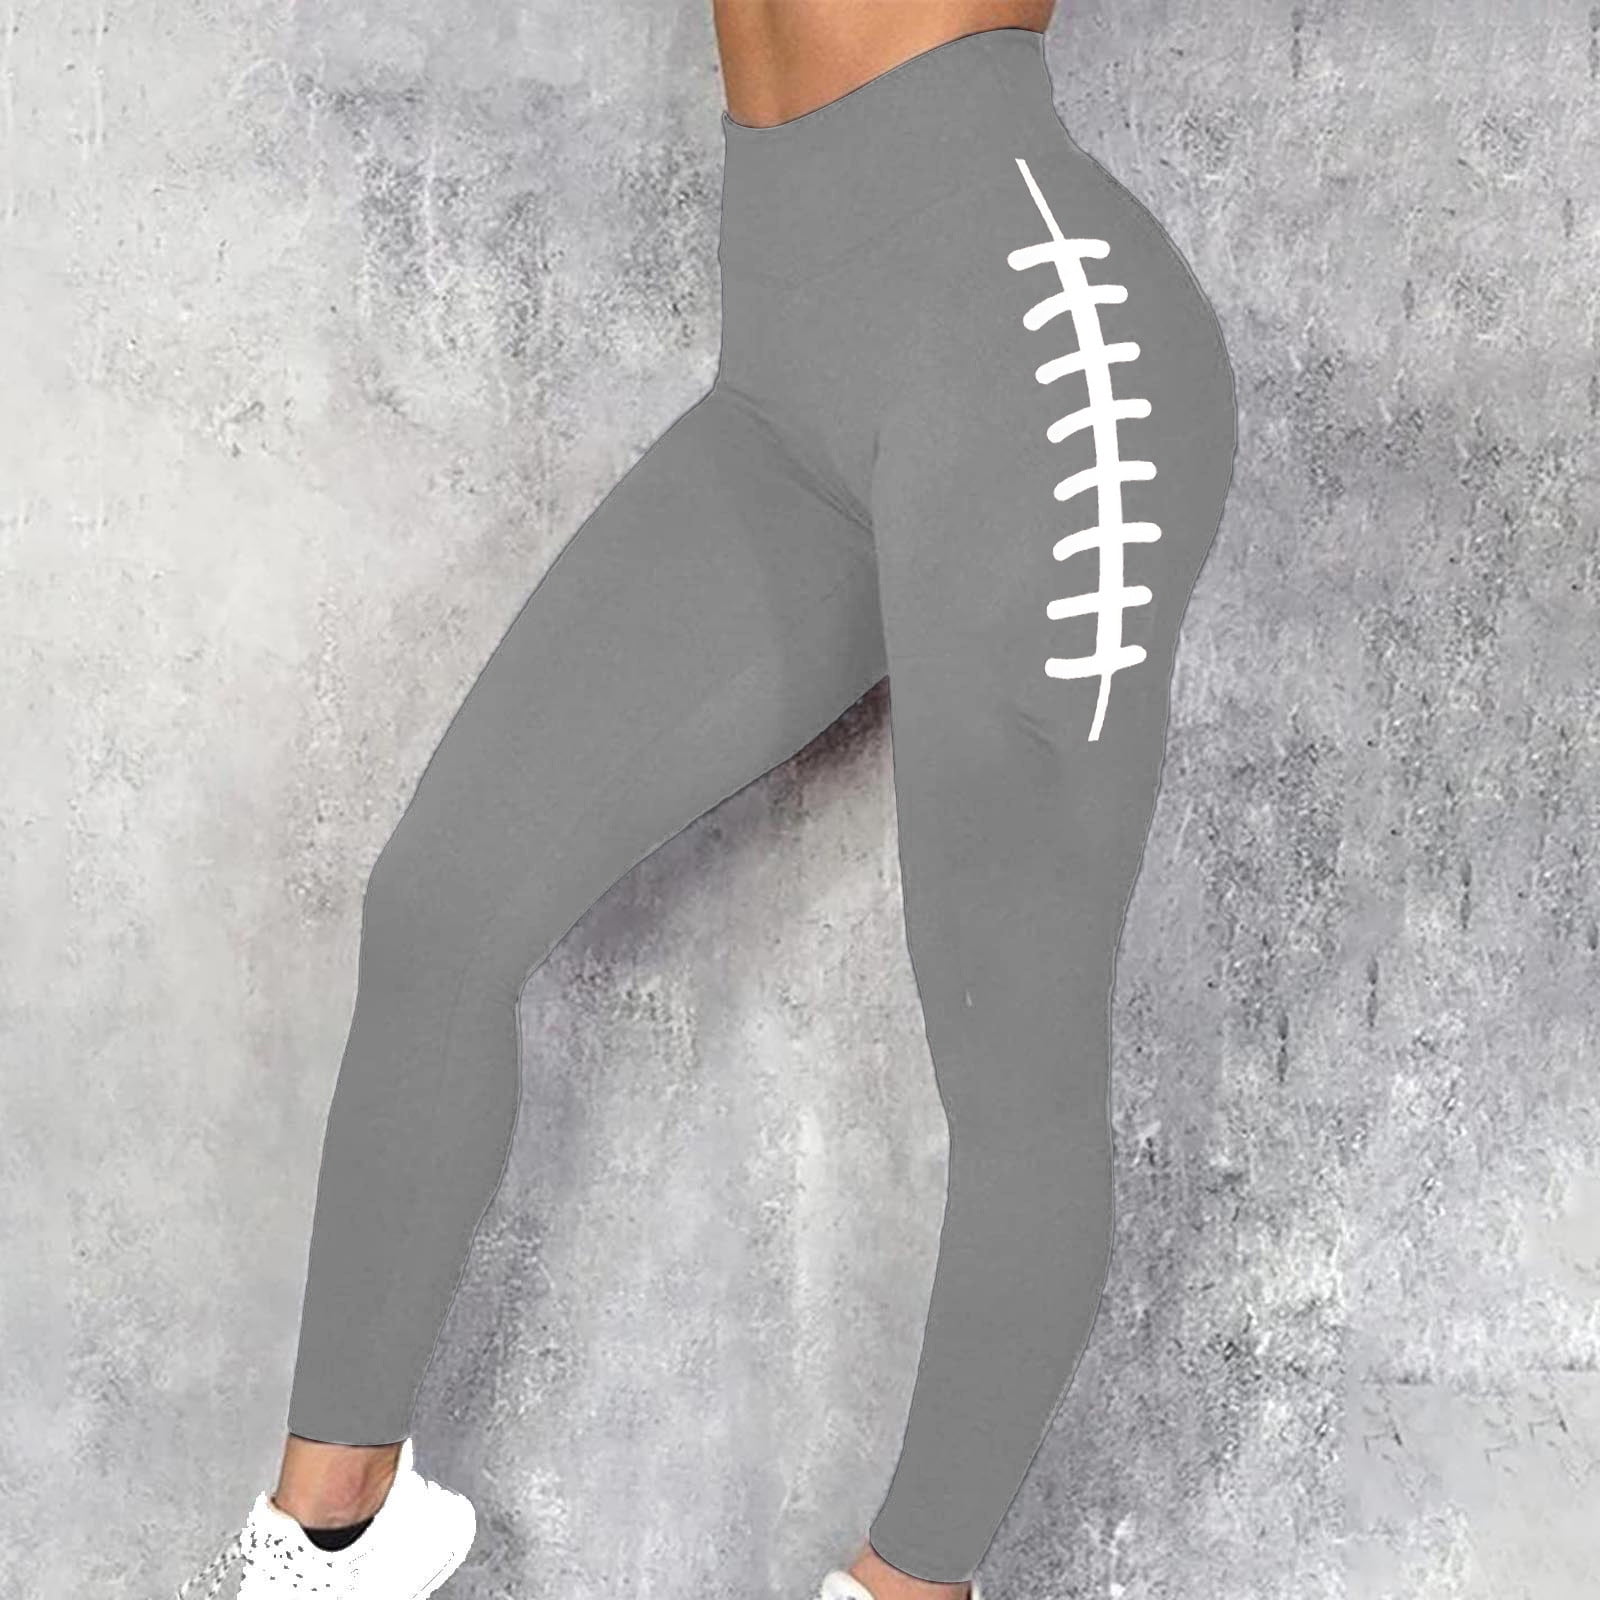 Spring Savings!Compression Leggings for Women Plus Size,Football Leggings  for Women,Game Day Pants Women Football Tights Tummy Control,Casual Sports